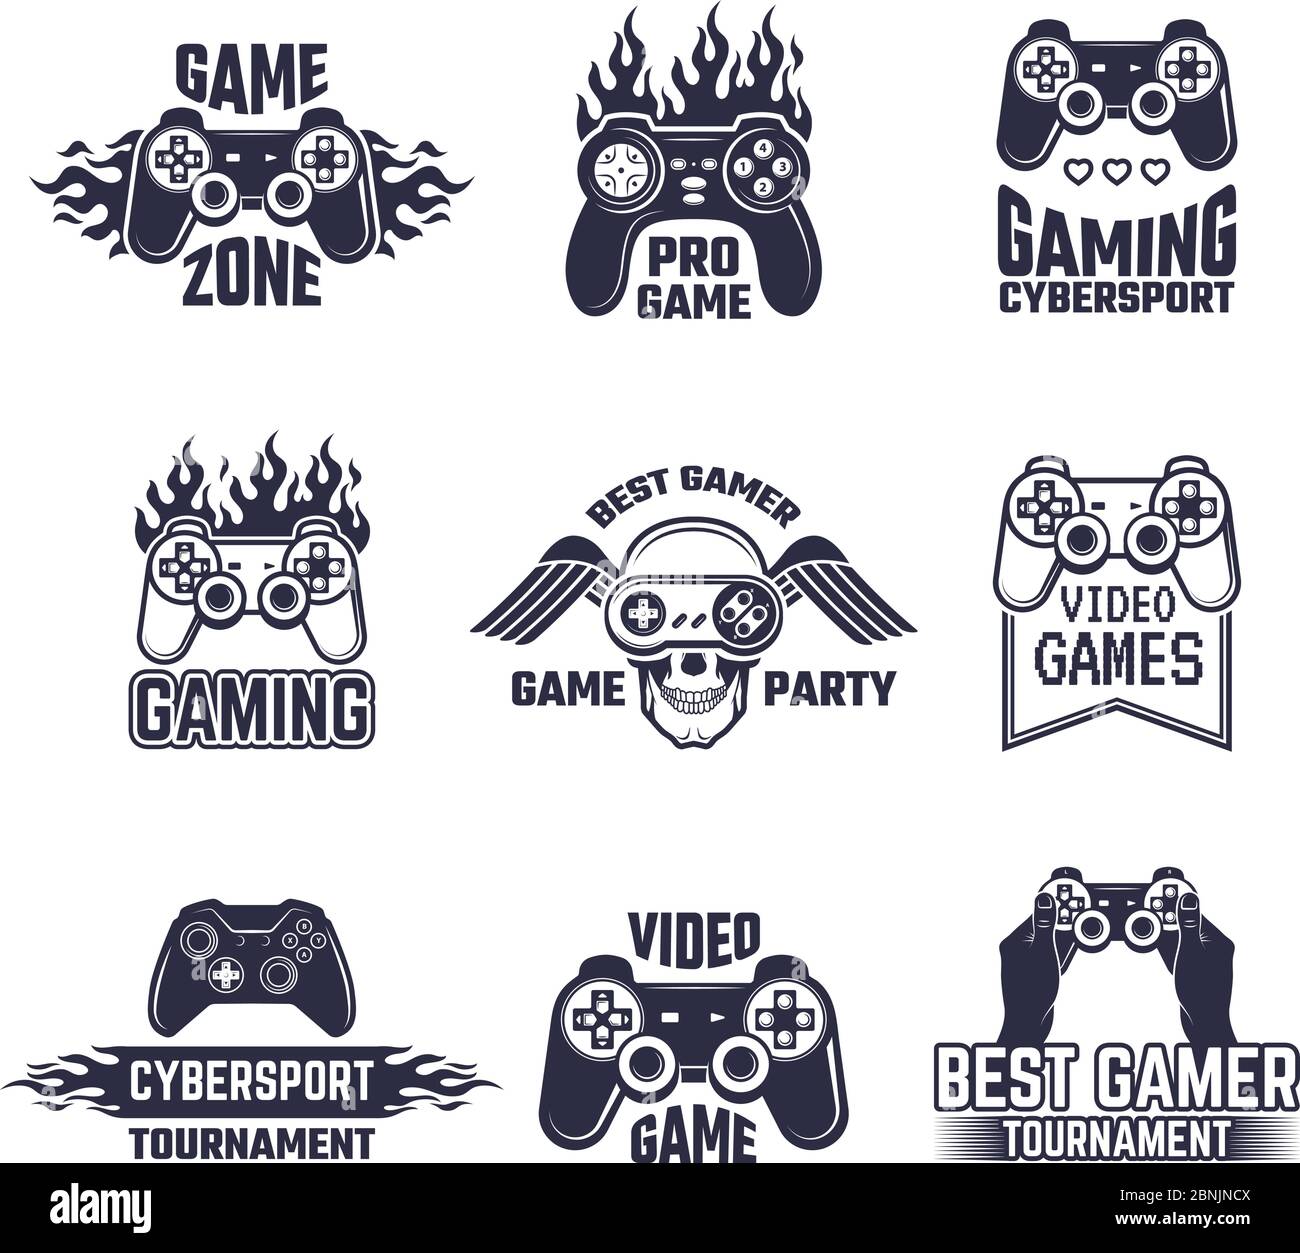 Cyber sport badges and labels. Pictures for gamers. Console and joystick Stock Vector